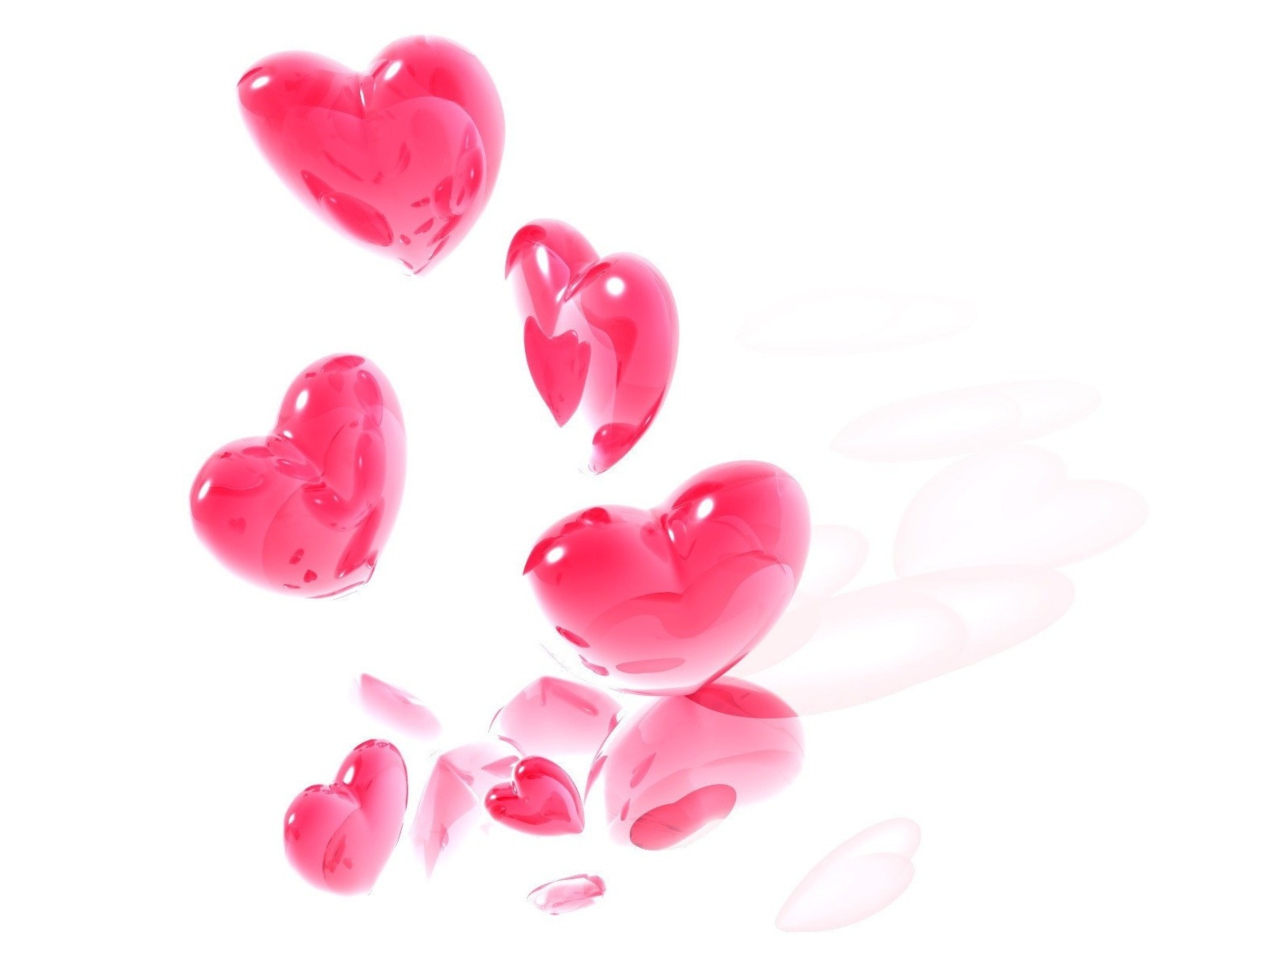 Abstract Pink Hearts On White screenshot #1 1280x960